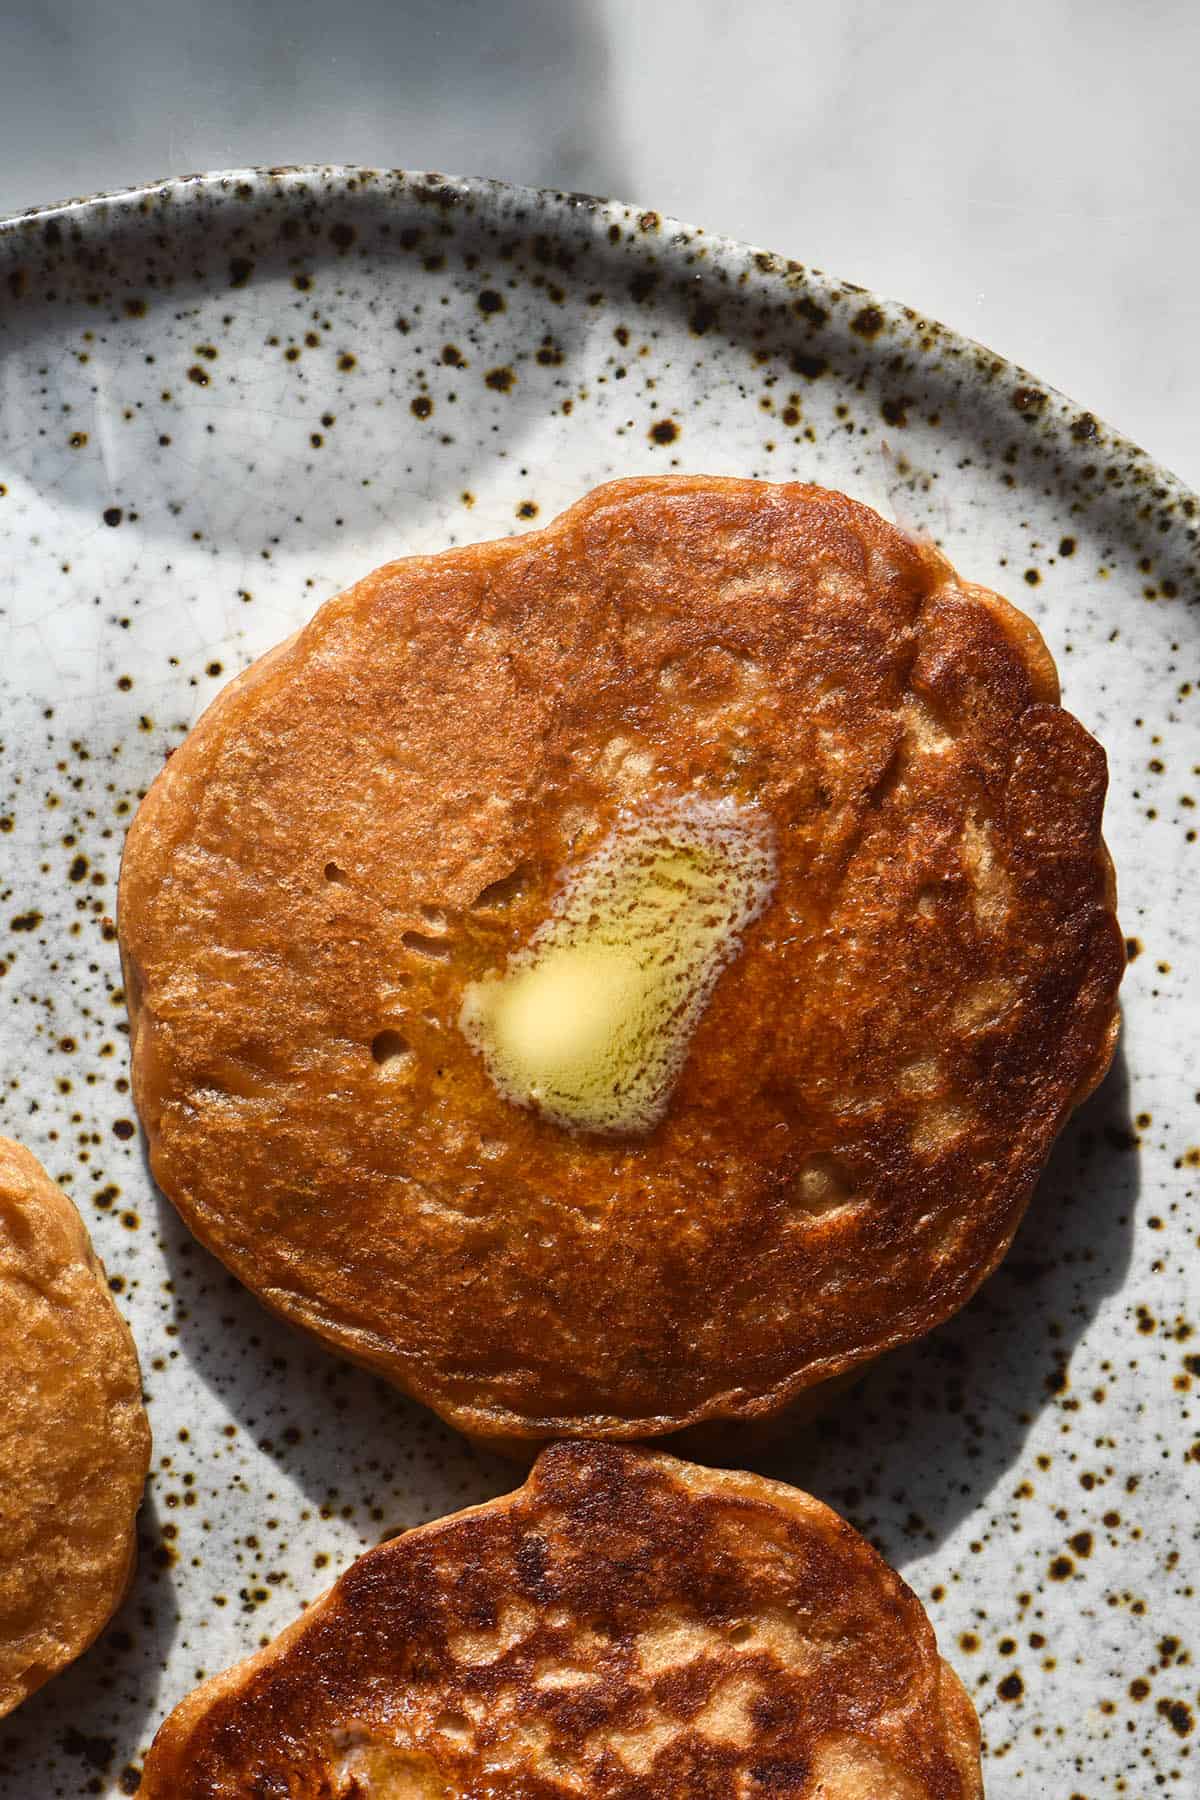 A close up aerial macro photo of three vegan protein pancakes on a white speckled ceramic plate. The central pancake is topped with a small pat of butter that is melting into the golden pancake